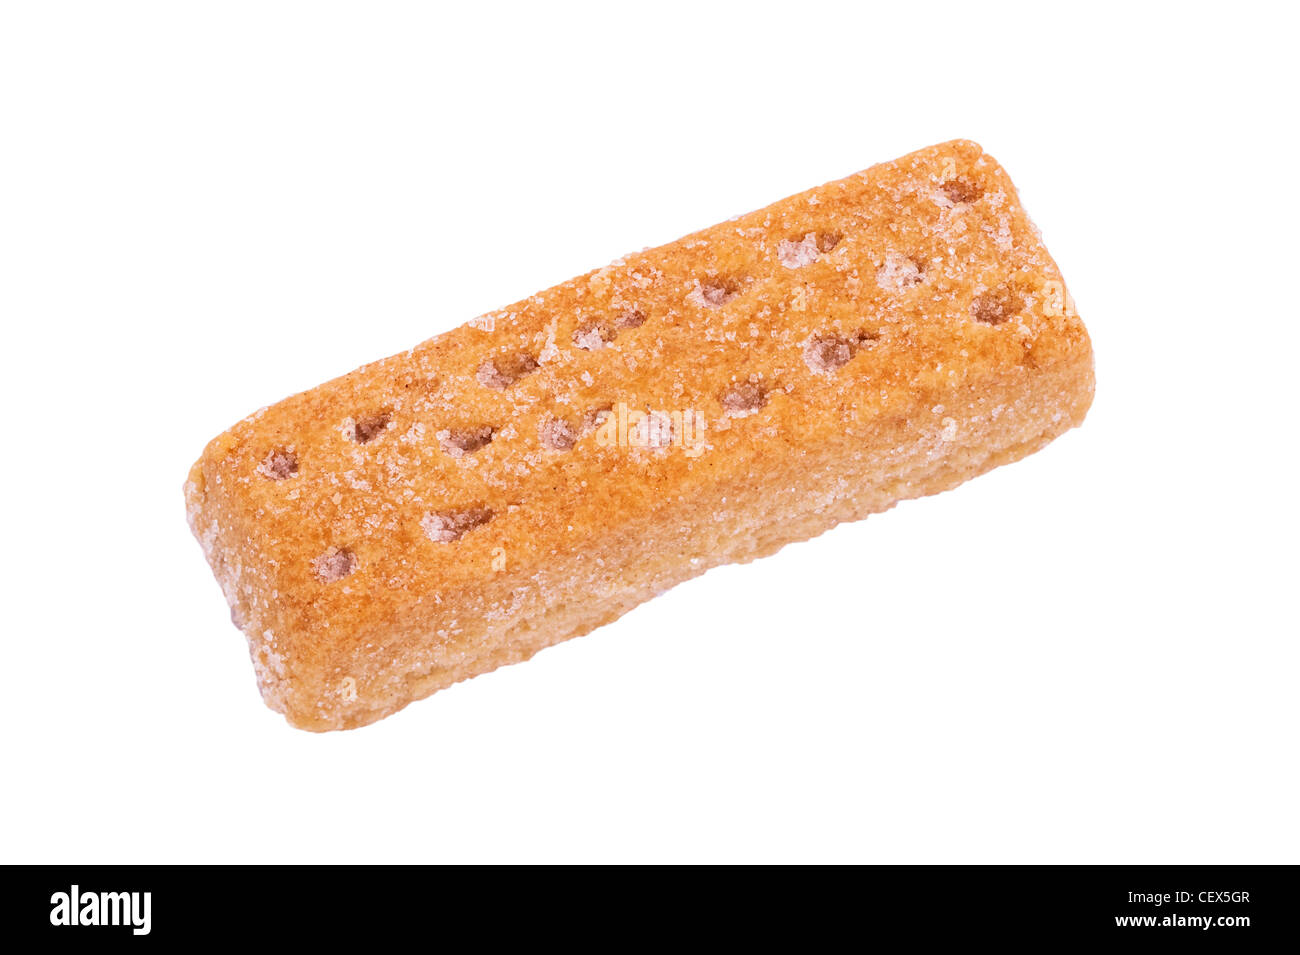 A shortbread finger biscuit on a white background Stock Photo